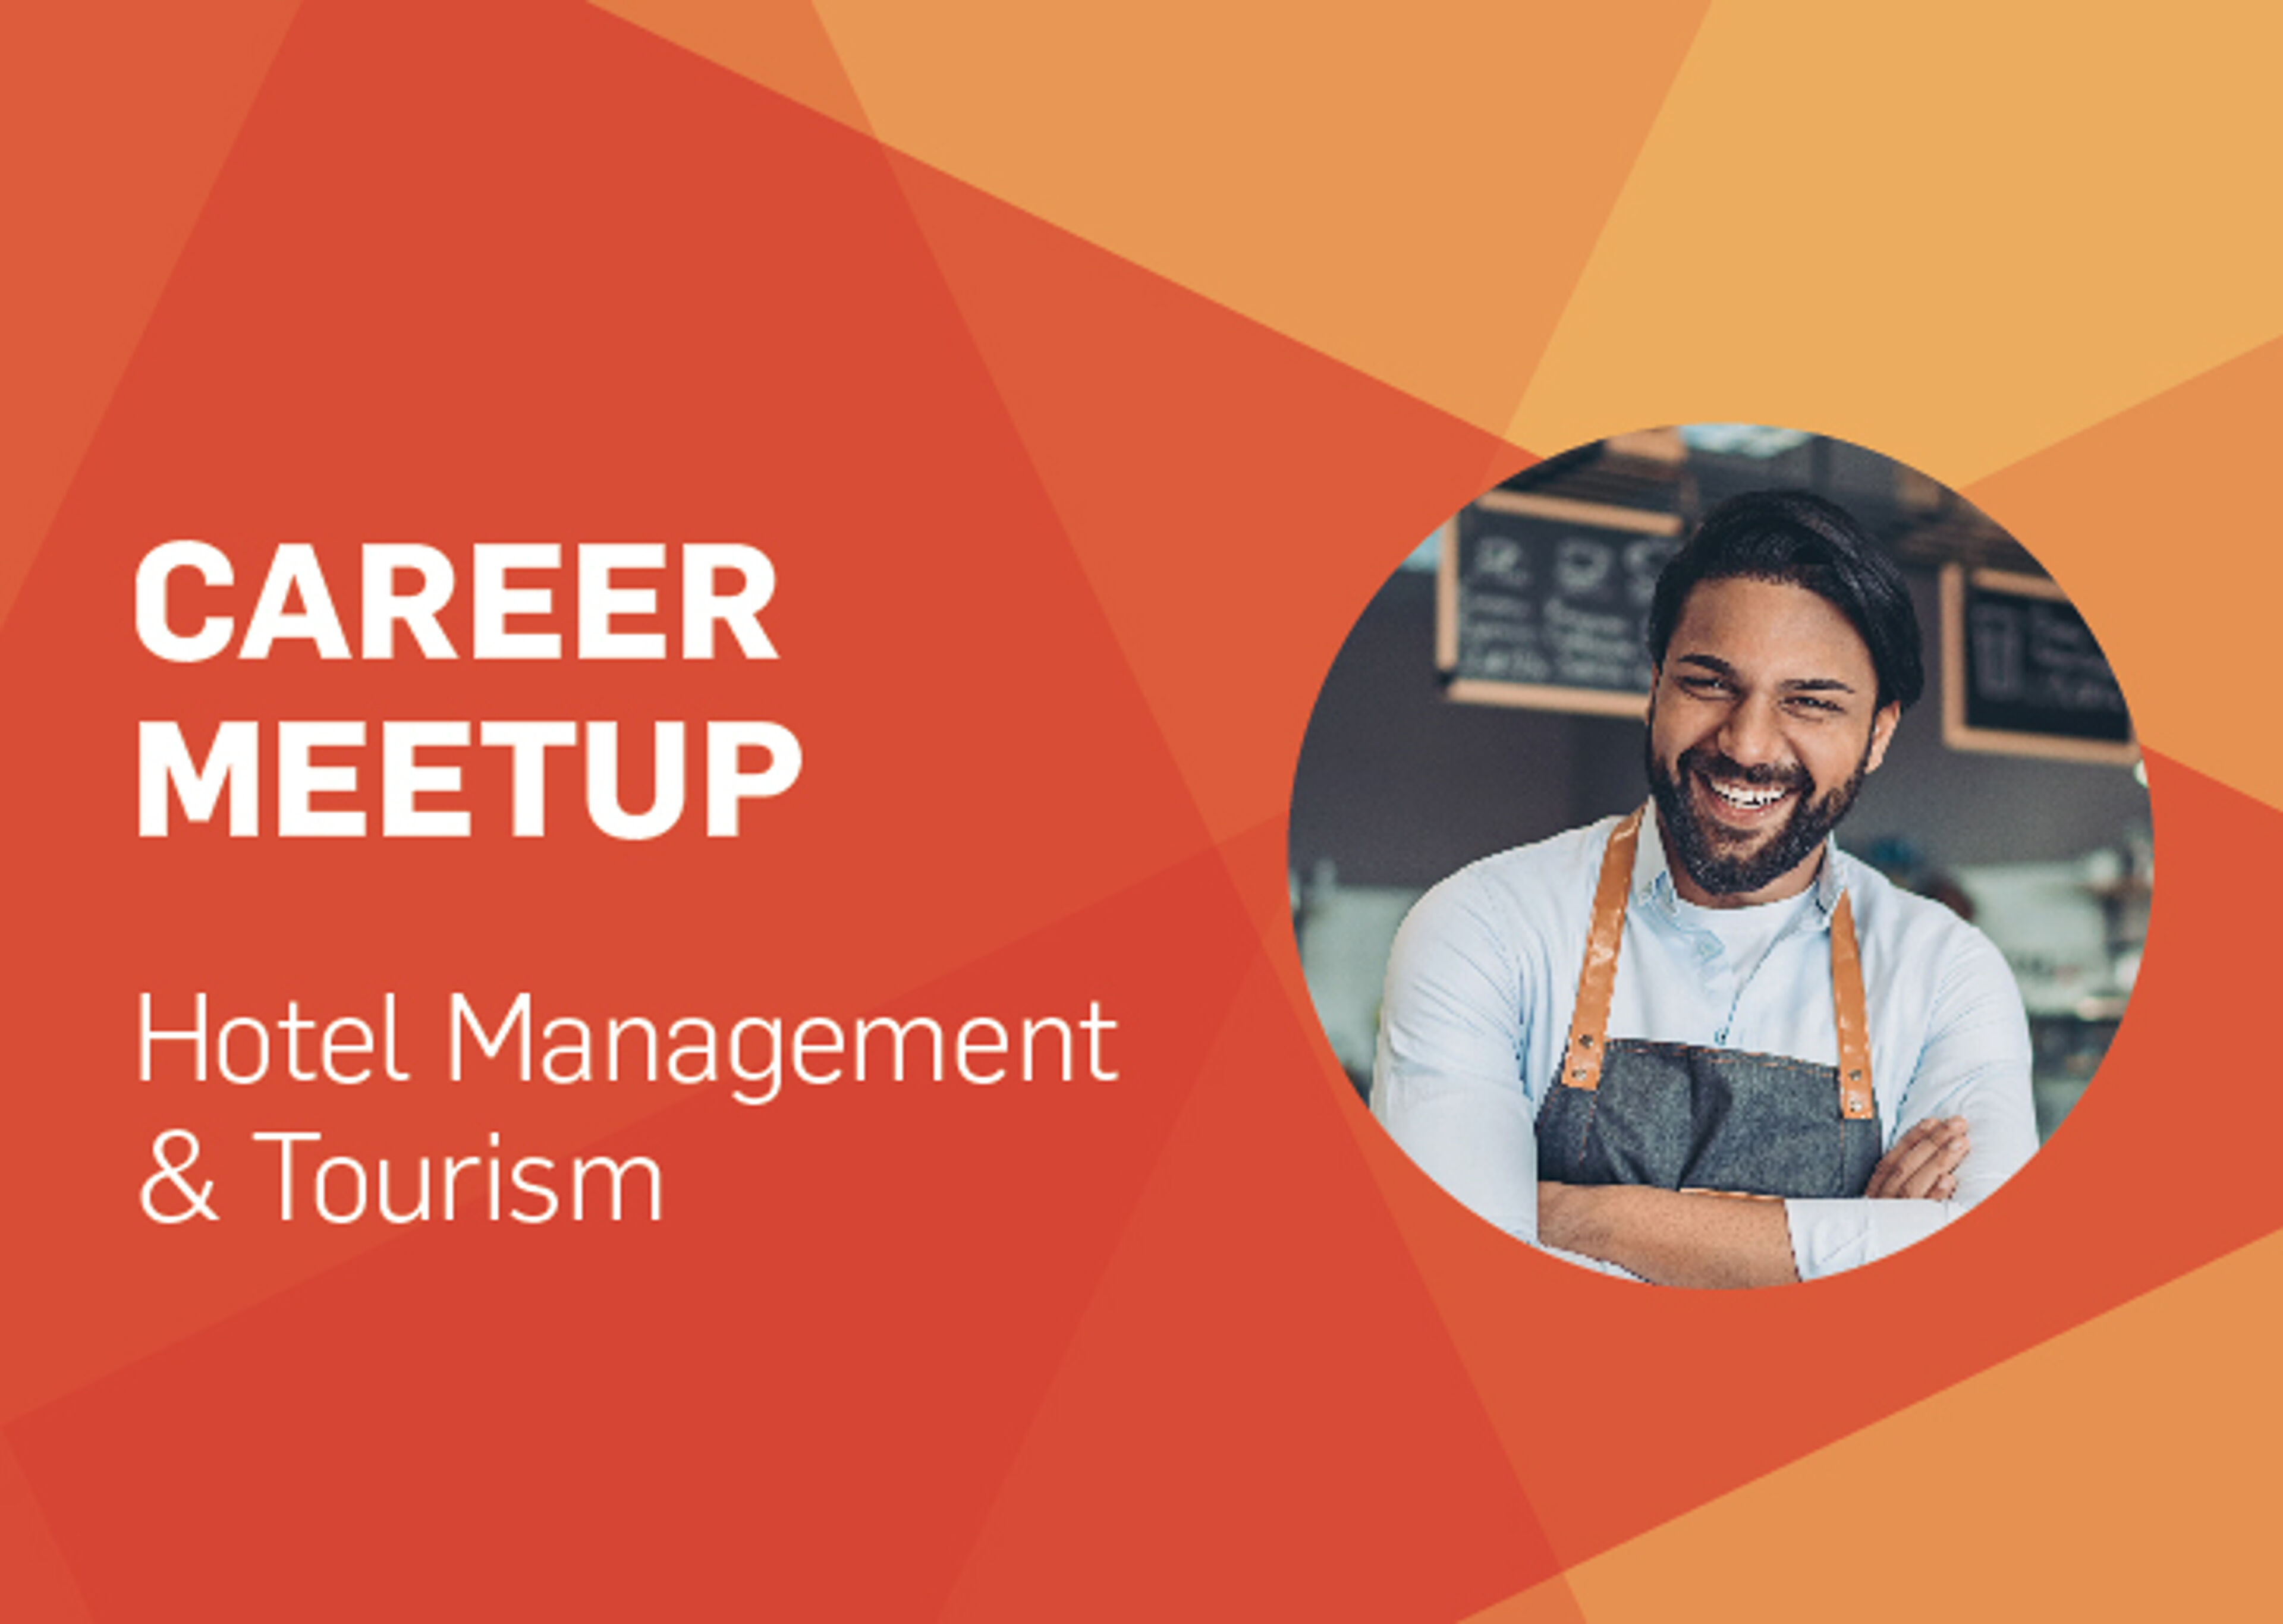 Cheerful chef portrait promoting a career meetup for Hotel Management & Tourism on a warm-toned geometric background.